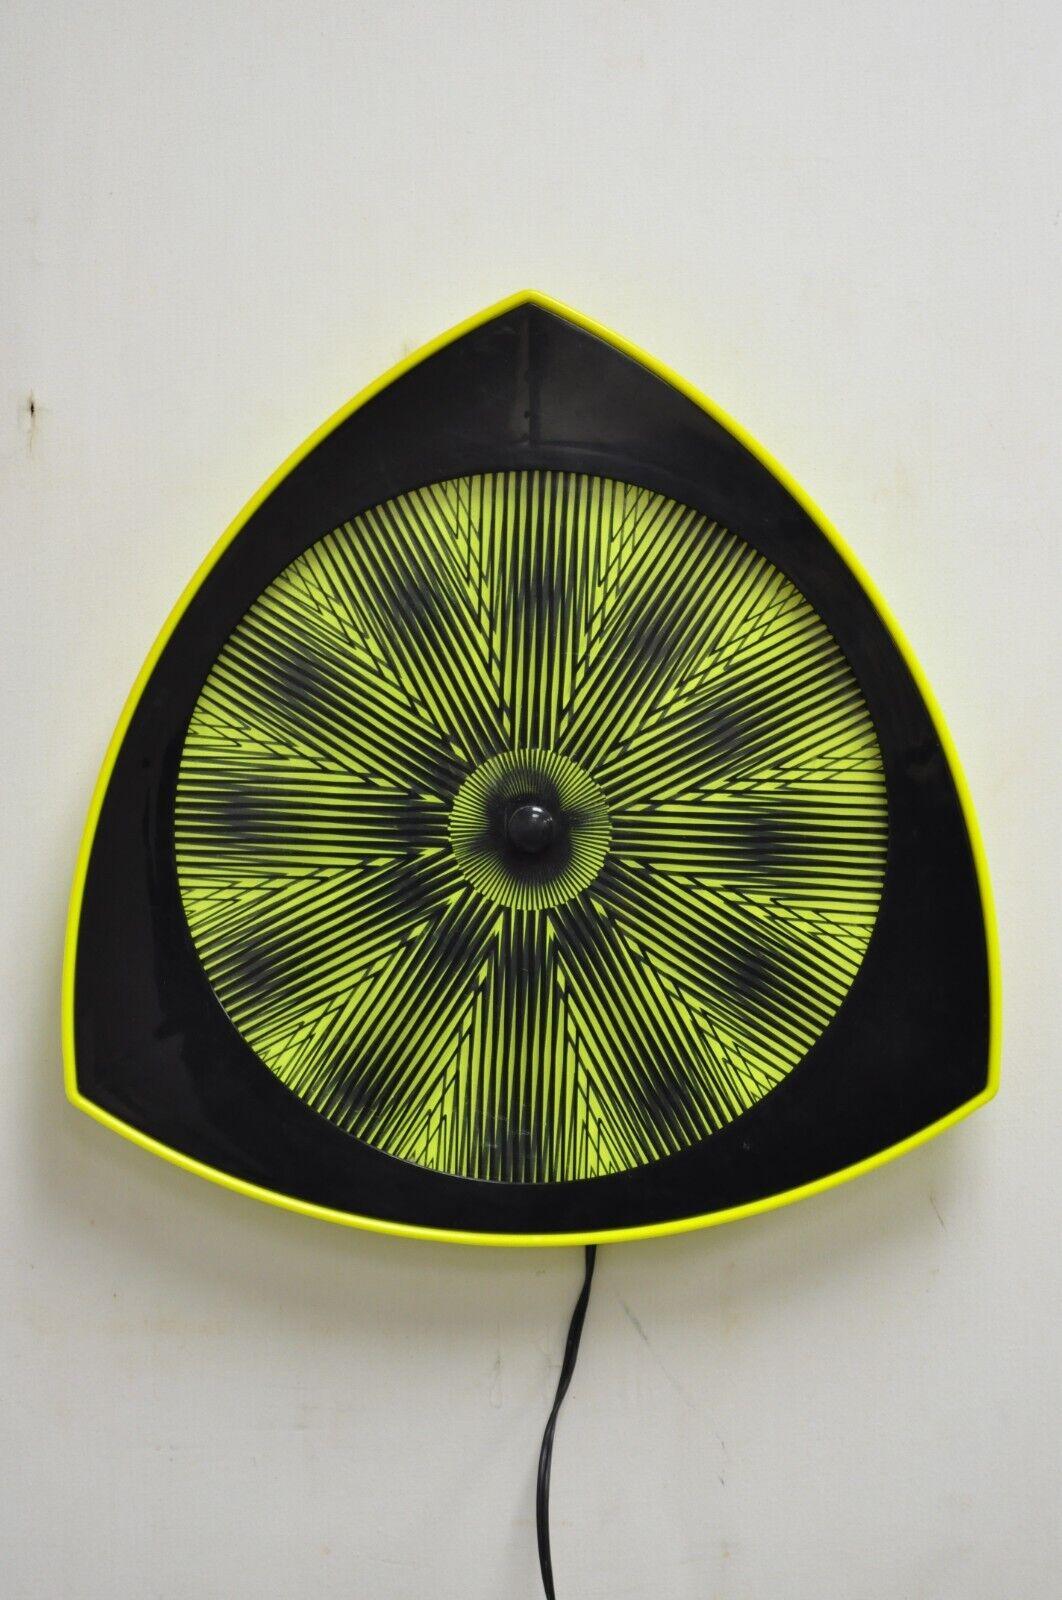 Vintage 1996 Rabbit Tanaka Lumaseries CyberSpace Neon Kinetic Wall Art (B). Item features a unique rotating form with changing optic geometric psychedelic patterns, original stamp, very nice vintage item. Circa Late 20th Century, 1996. Measurements: